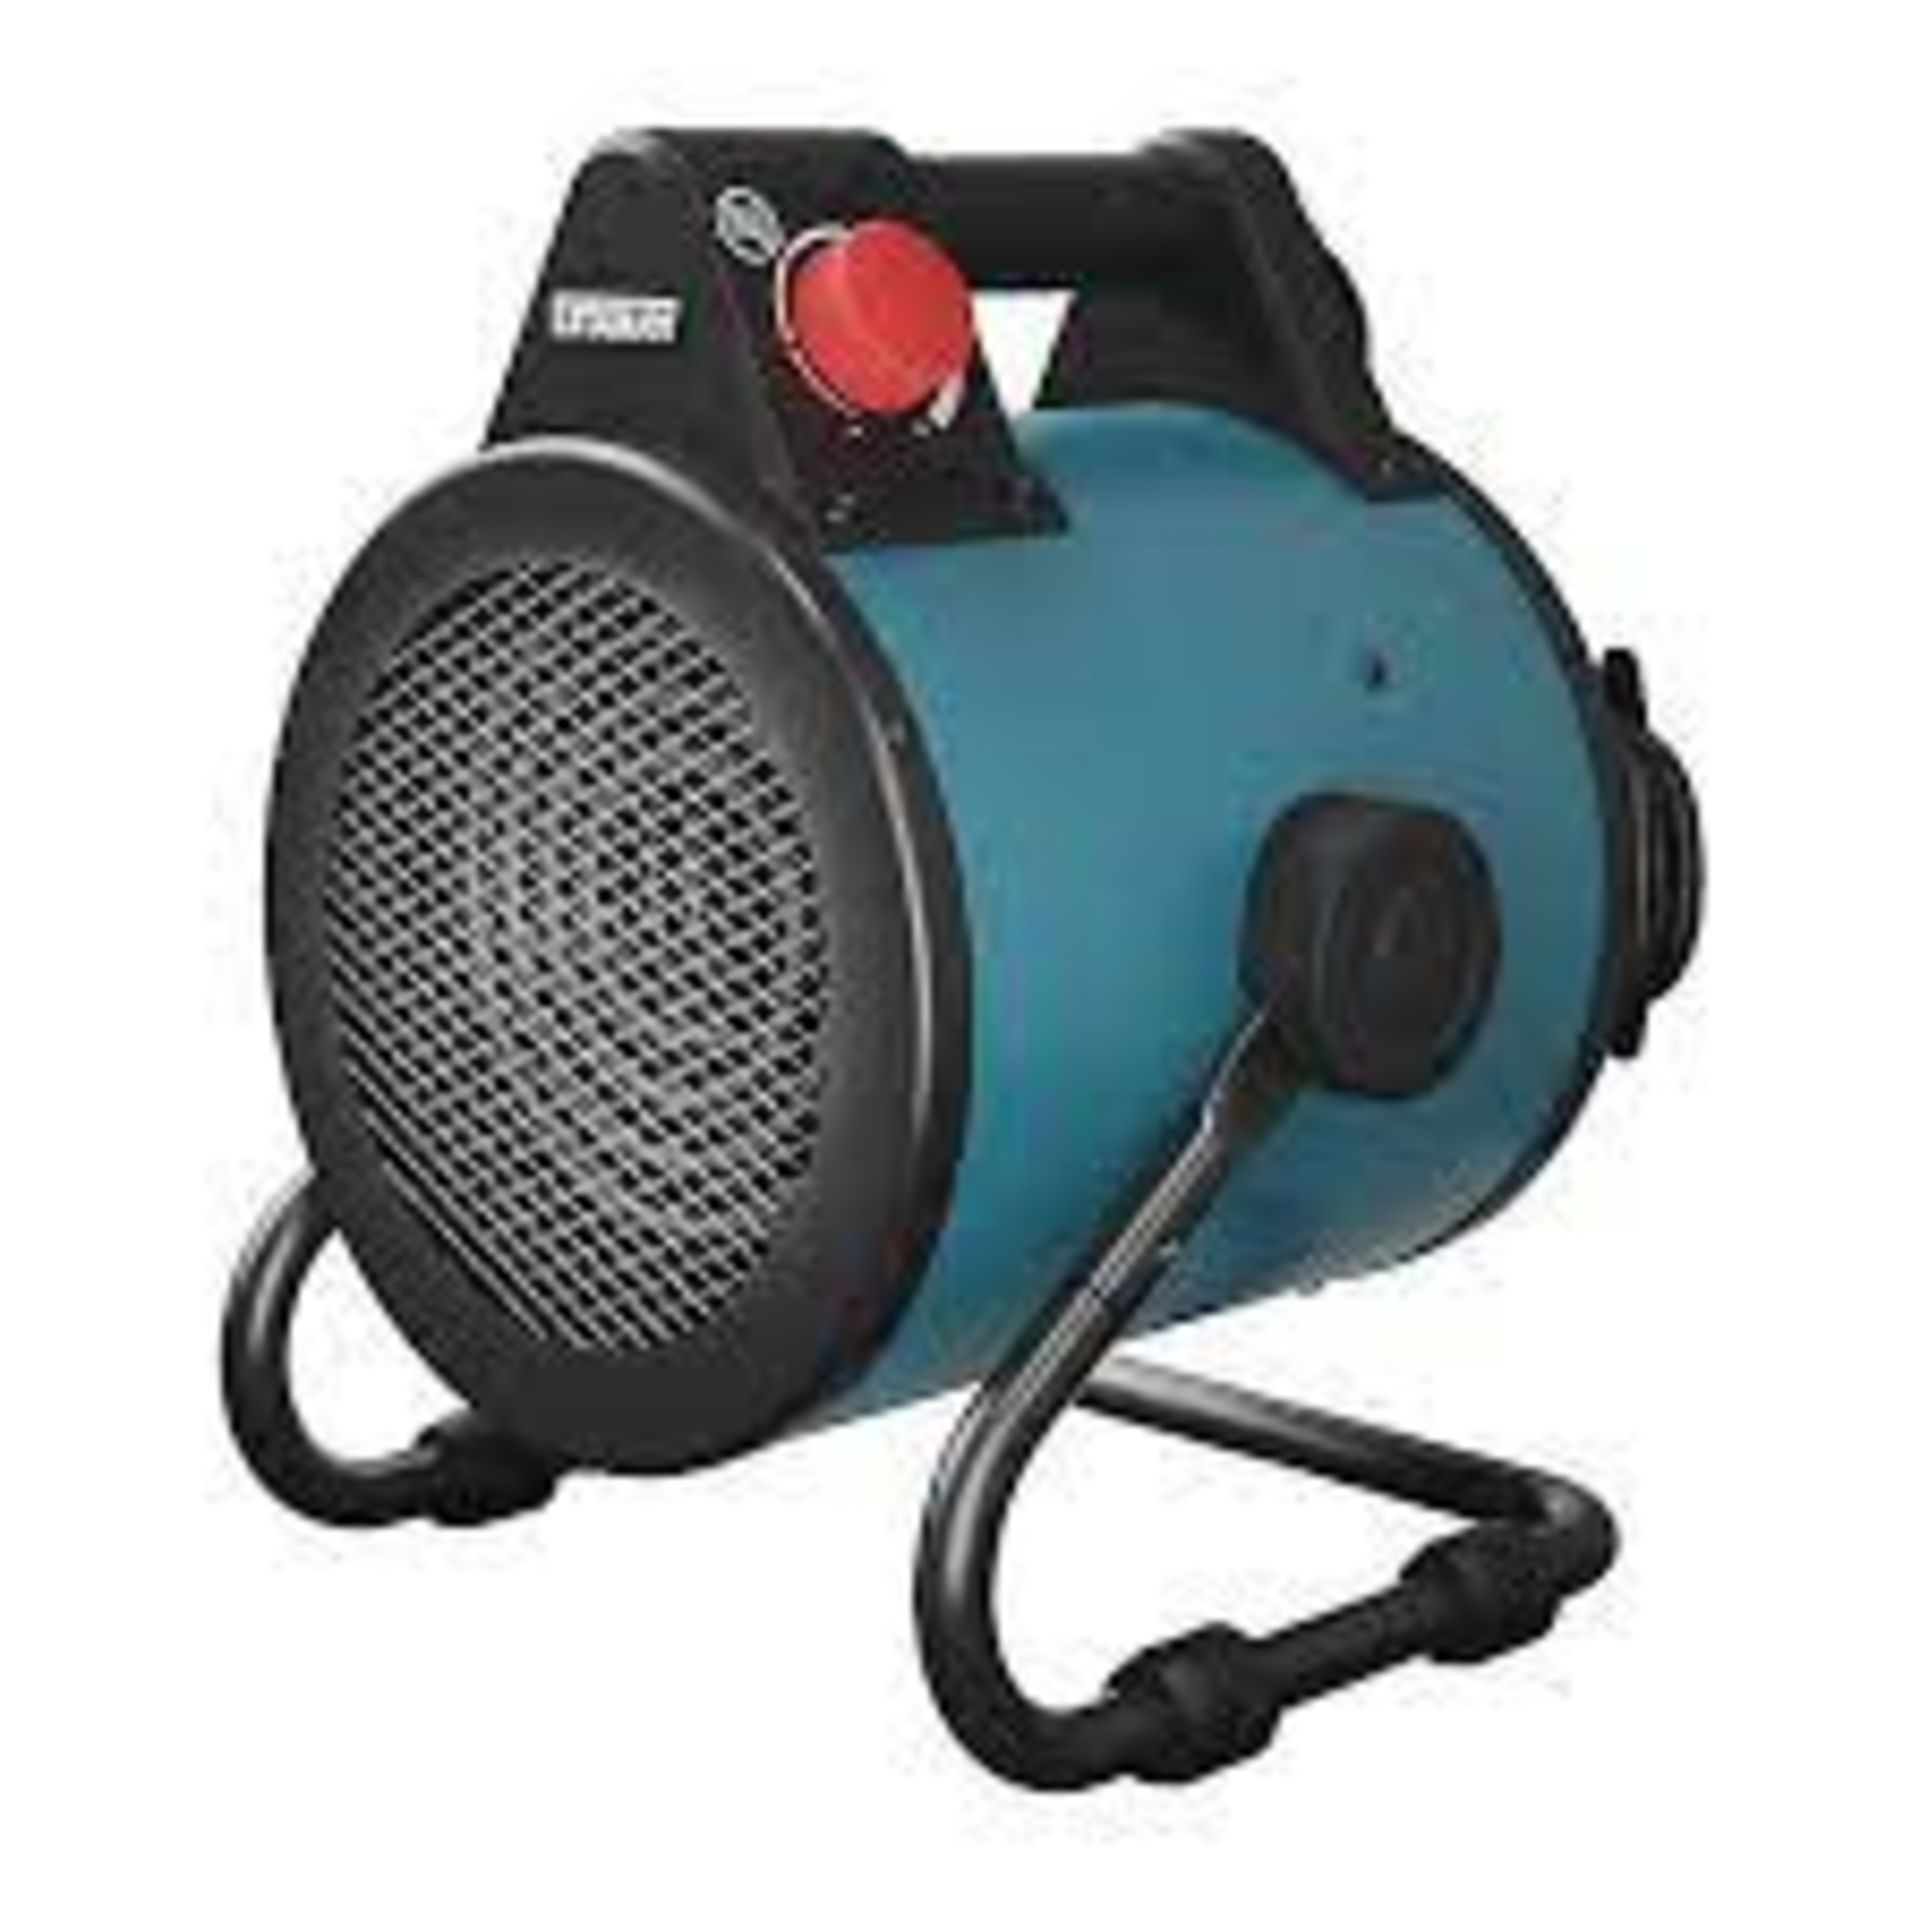 Erbauer 2000W Electric Workshop HeaterThis Erbauer portable heater is perfect for keeping your